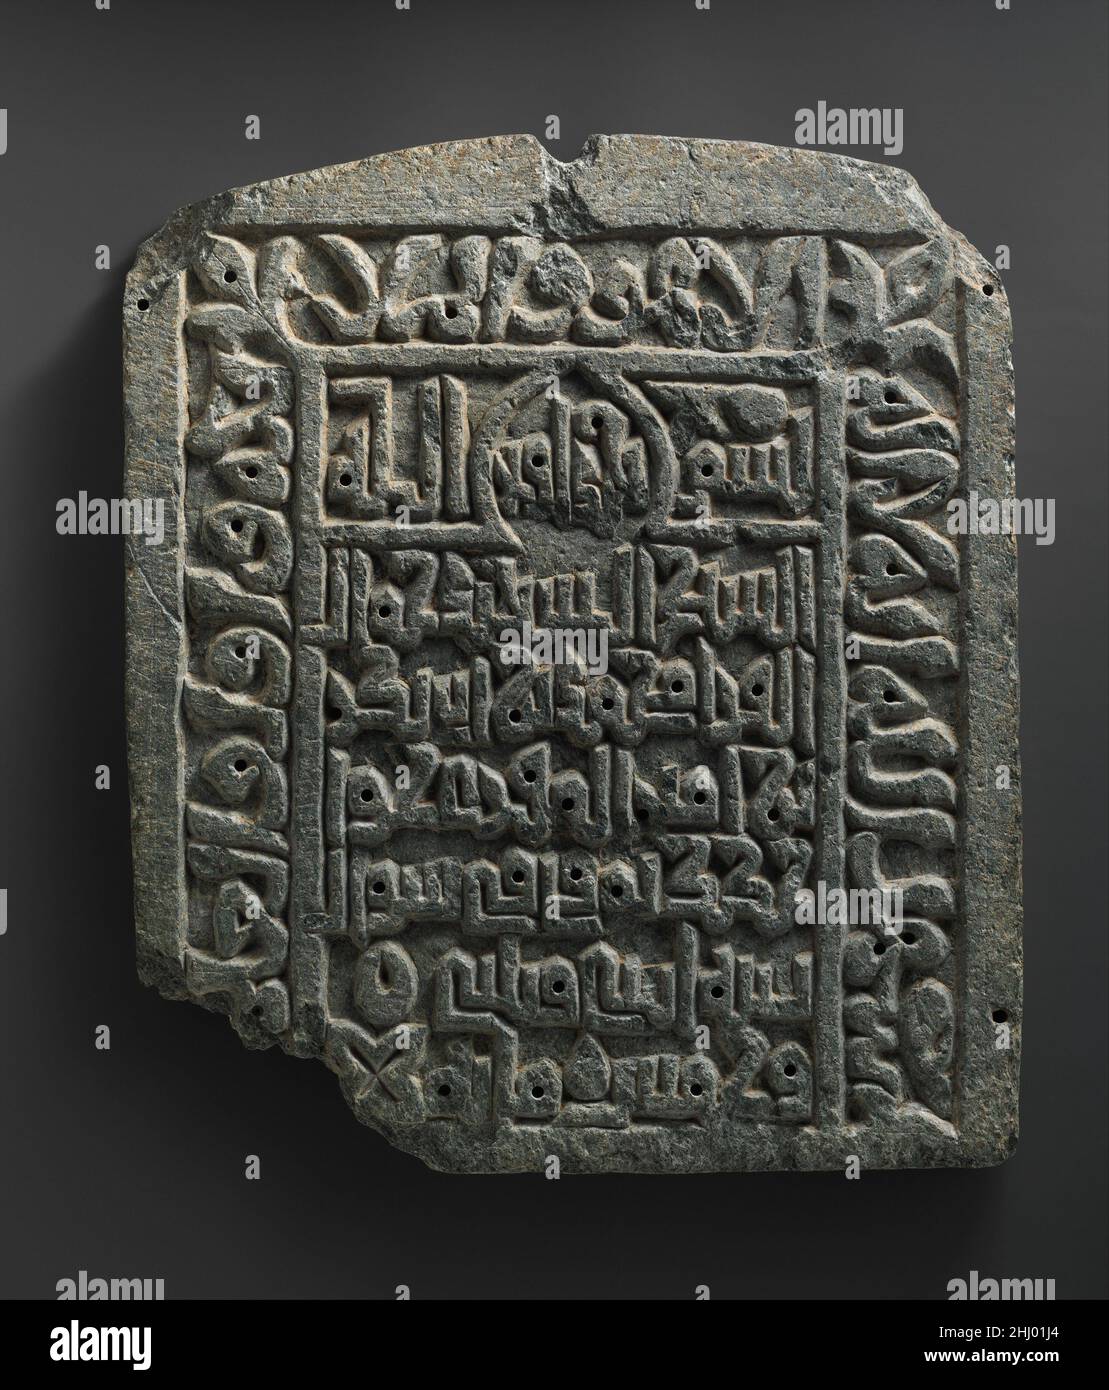 Gravestone of Muhammad ibn Abi Bakr, died Shawwal A.H. 532/ June/July A.D. 1138 dated A.H. 532/A.D. 1138 The inscription states that it is the tombstone of “the Shaykh, the martyr Jamal al-Qura' Muhammad b. Abi Bakr b. Amin al-Muqri' Khwajakak.” “Shaykh” identifies the deceased as a scholar, Sufi, or social leader, while “martyr” suggests that his death did not occur naturally. The son of a muqri' or Qur'an reciter, Jamal is characterized as “al-Qura',” an ascetic. “Khwajakak” is related to the Persian word for merchant, possibly his occupation.. Gravestone of Muhammad ibn Abi Bakr, died Shaww Stock Photo